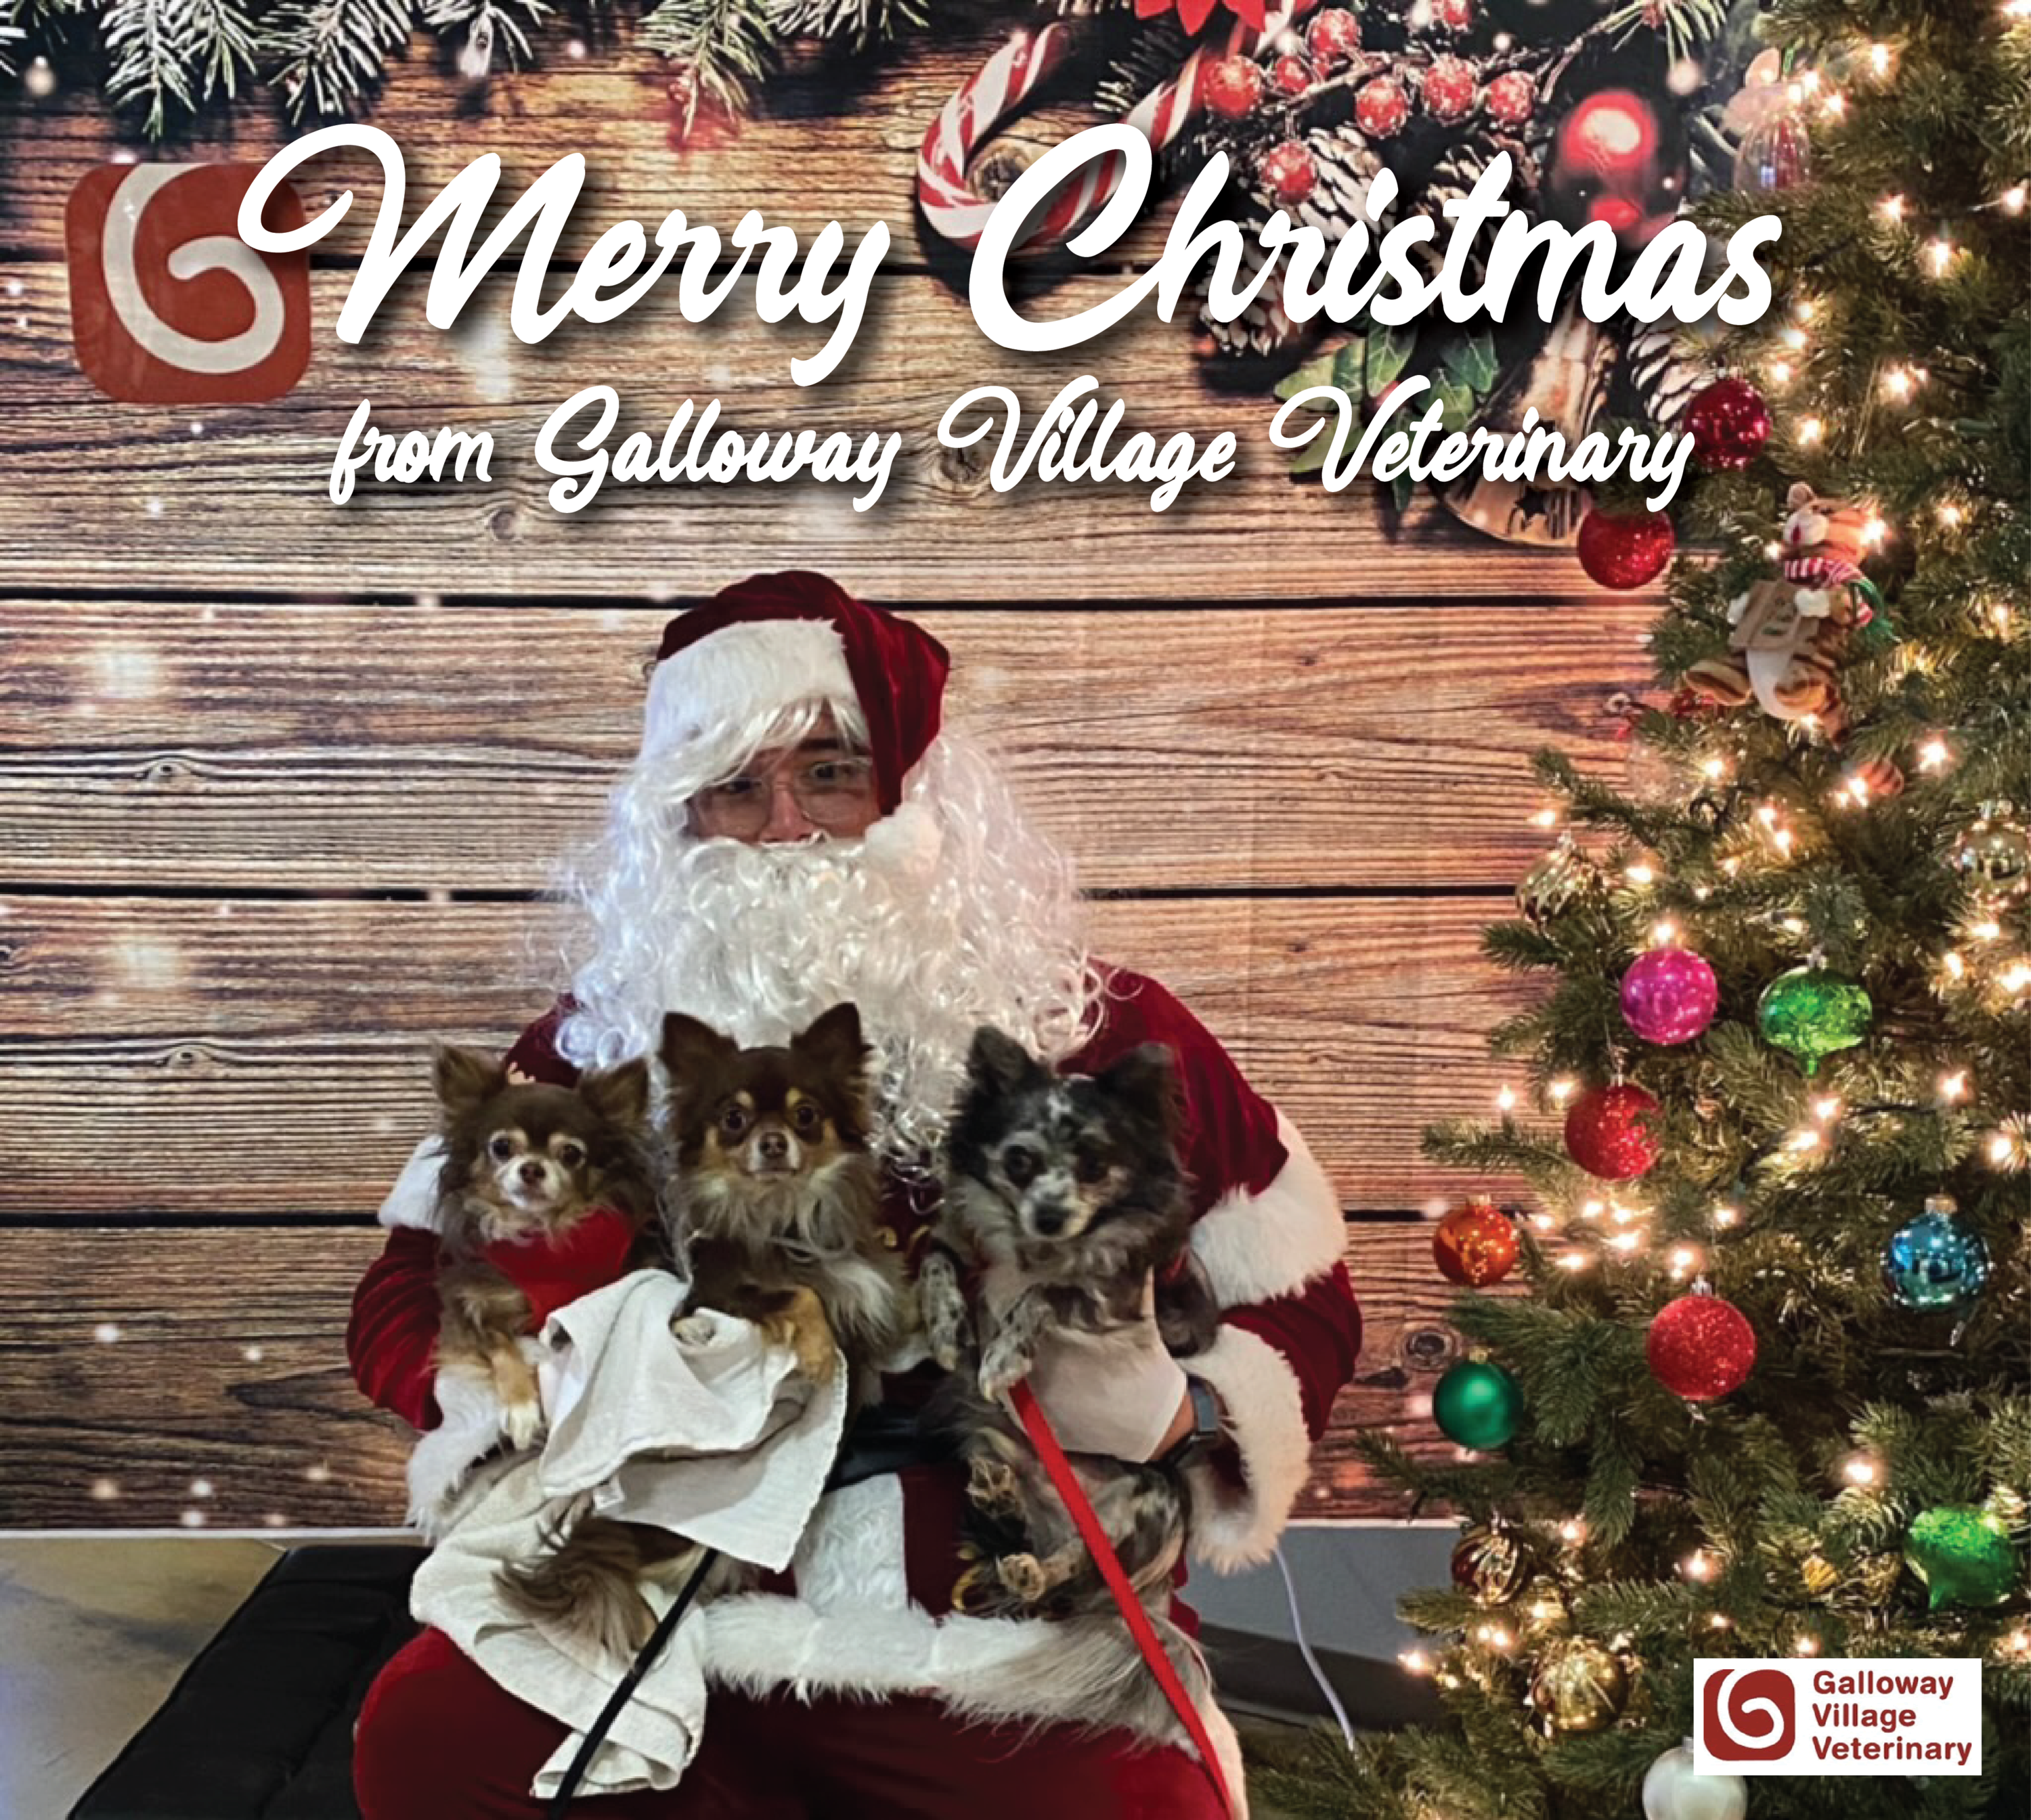 Santa visited Galloway Village Veterinary and posed for pictures with a few lucky pets.